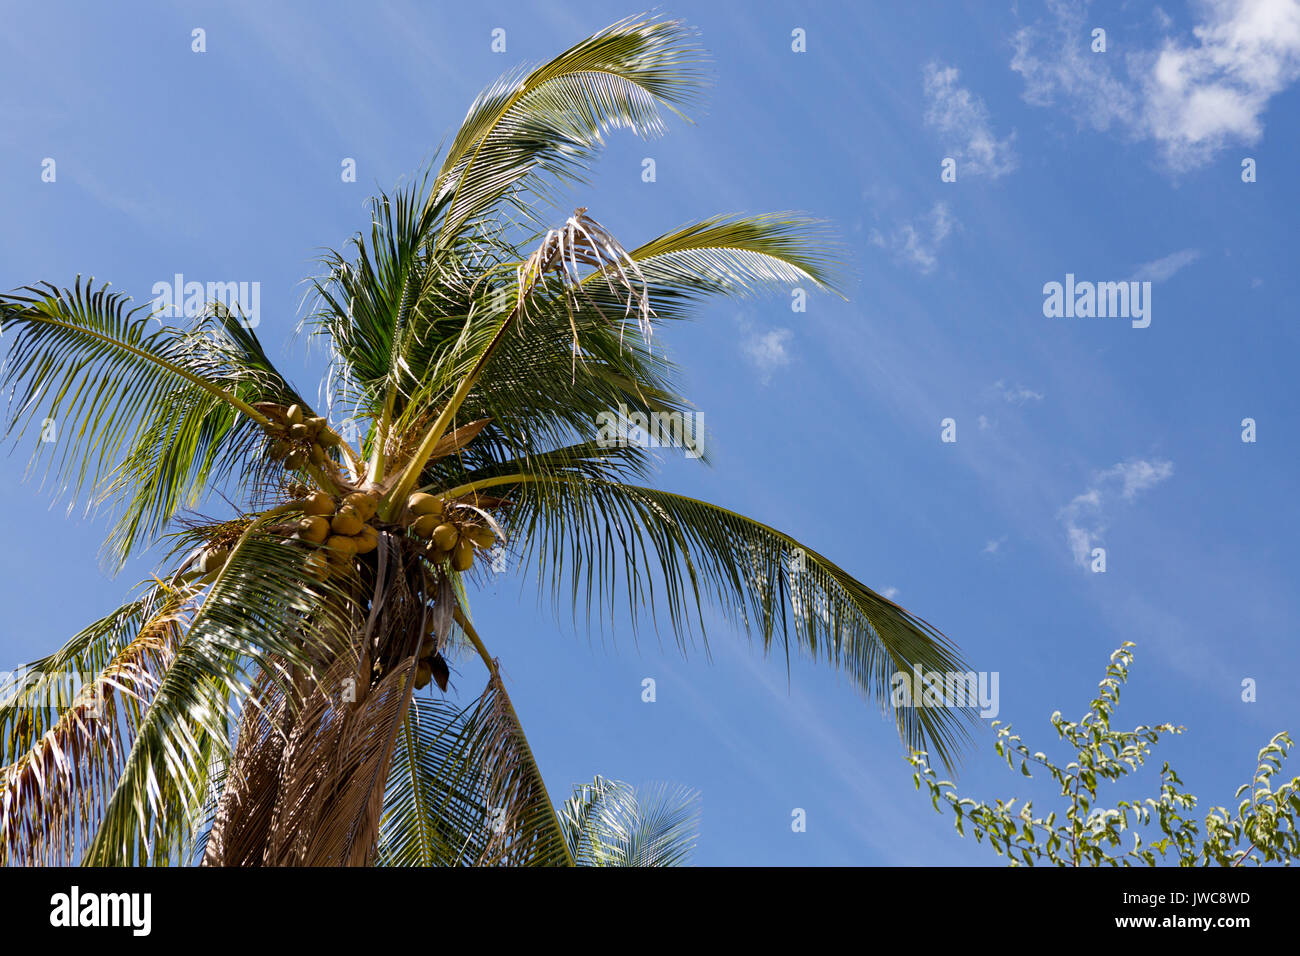 Against a blue sky,details of a coconut tree located on the small island named Isla Granito de Oro,meaning Little Grain of Gold. Stock Photo